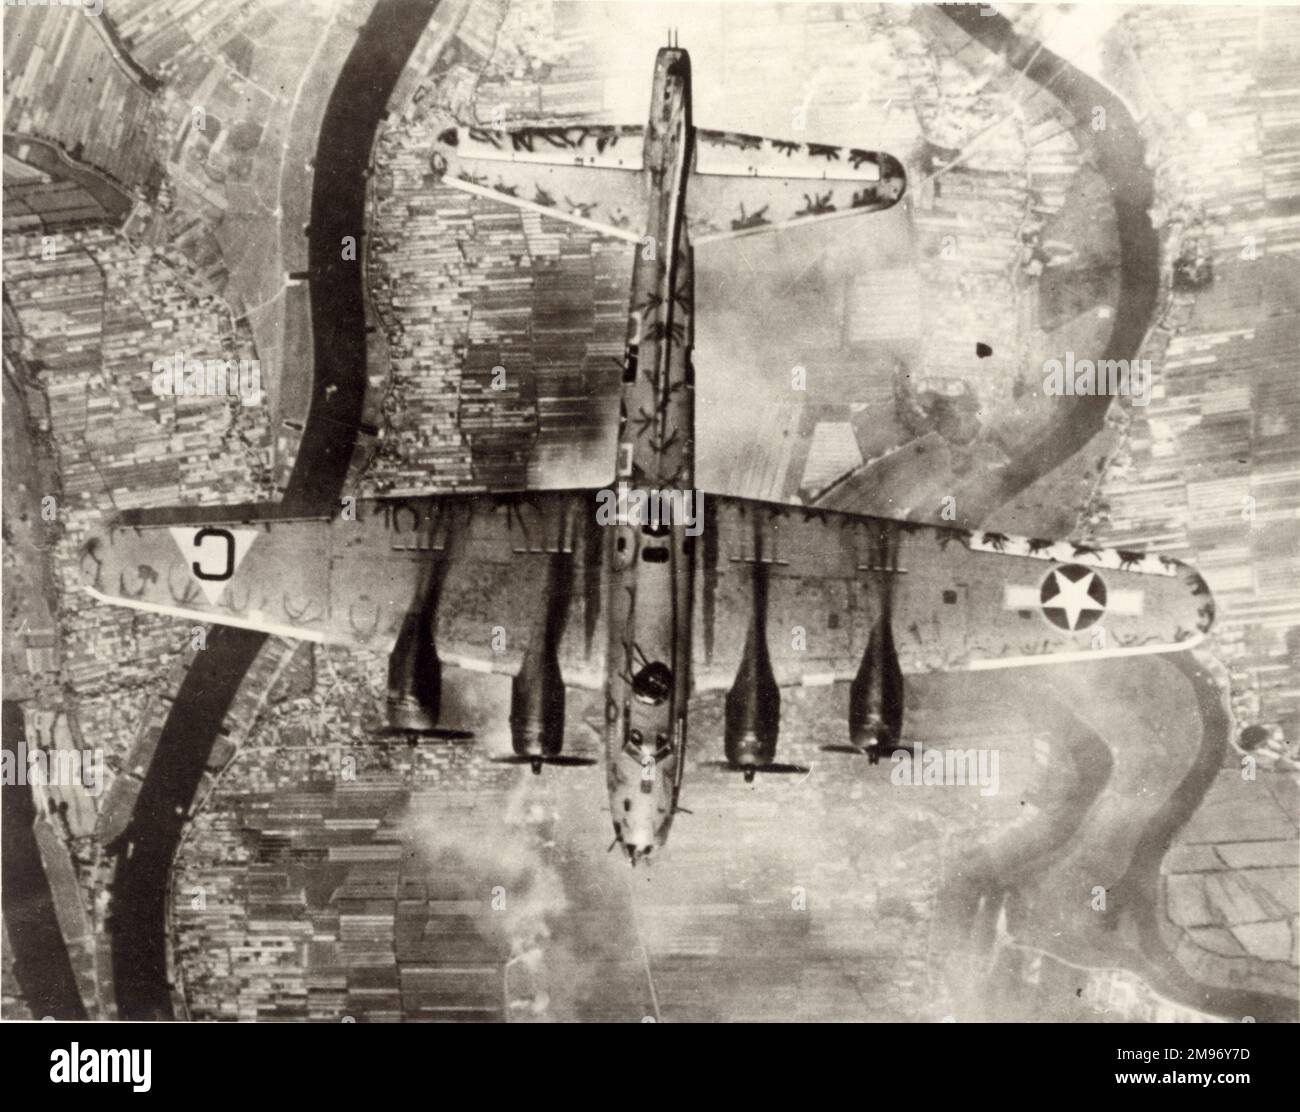 Boeing B-17 Flying Fortress dall'alto. Foto Stock